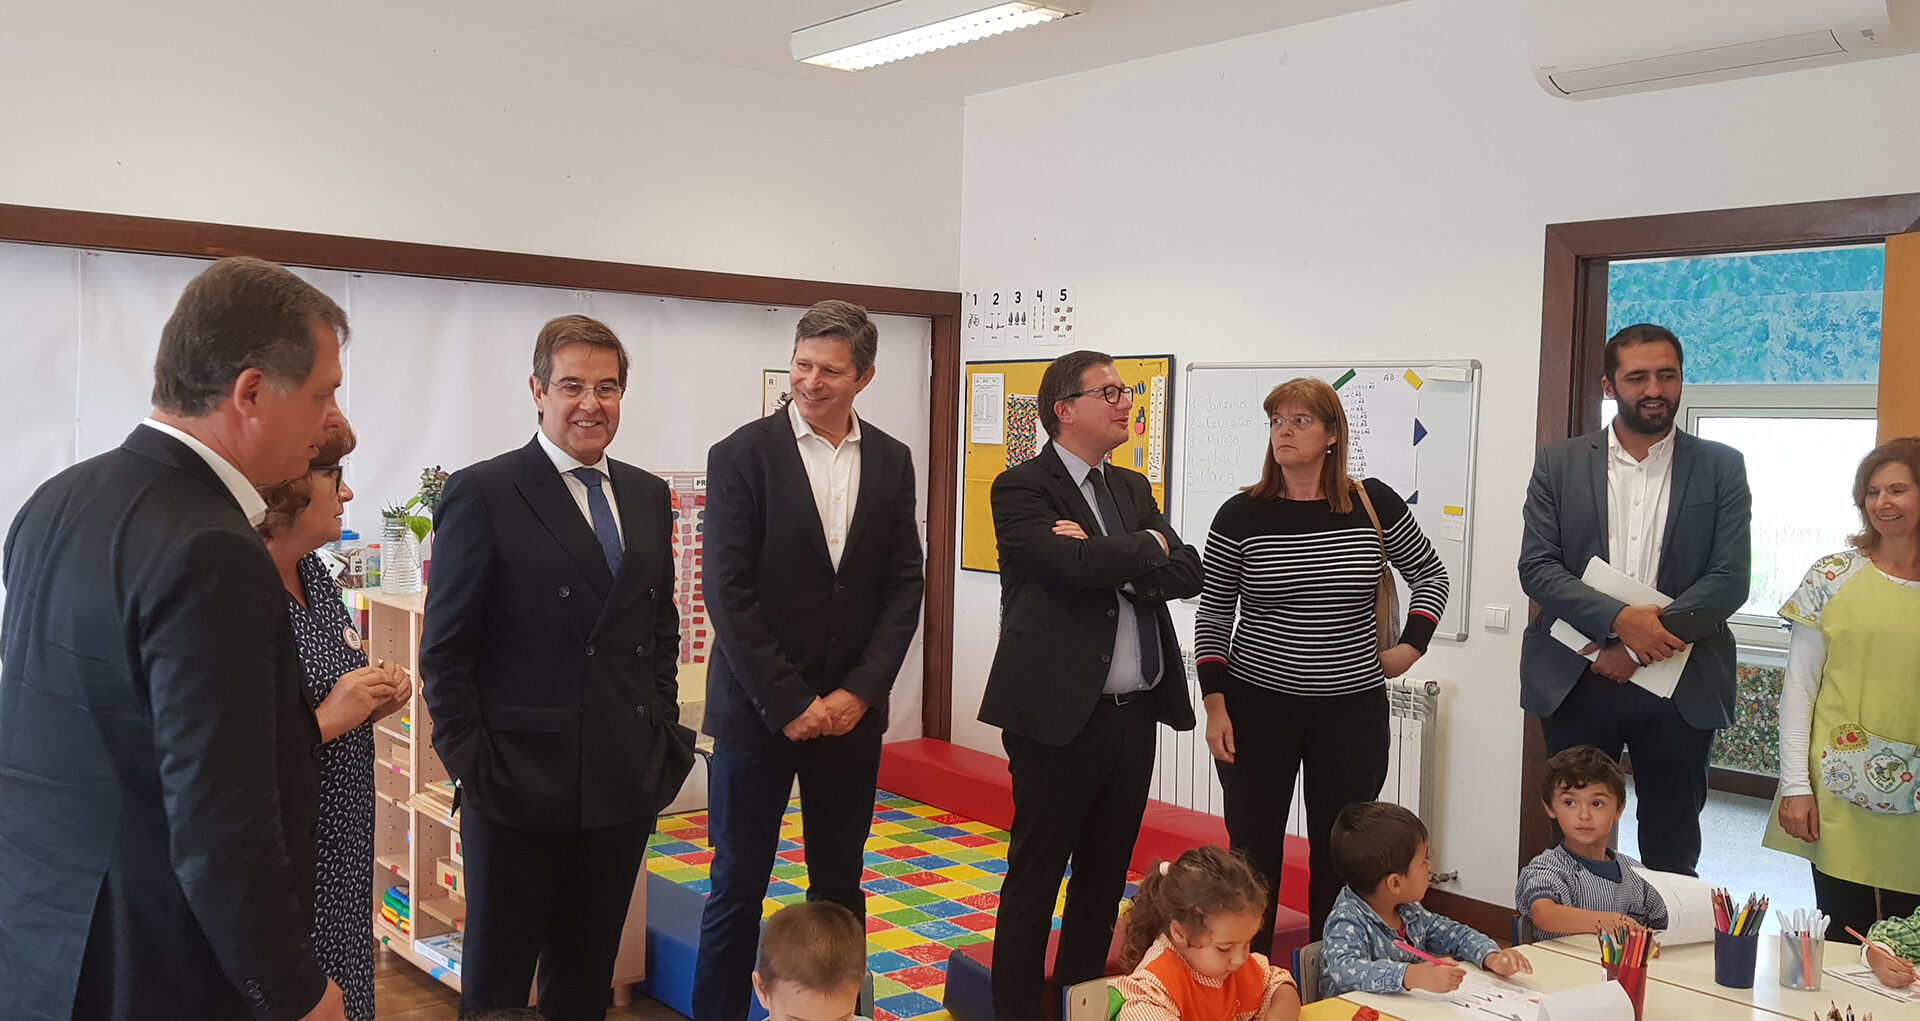 Leirosa’s Kindergarten with new air conditioning